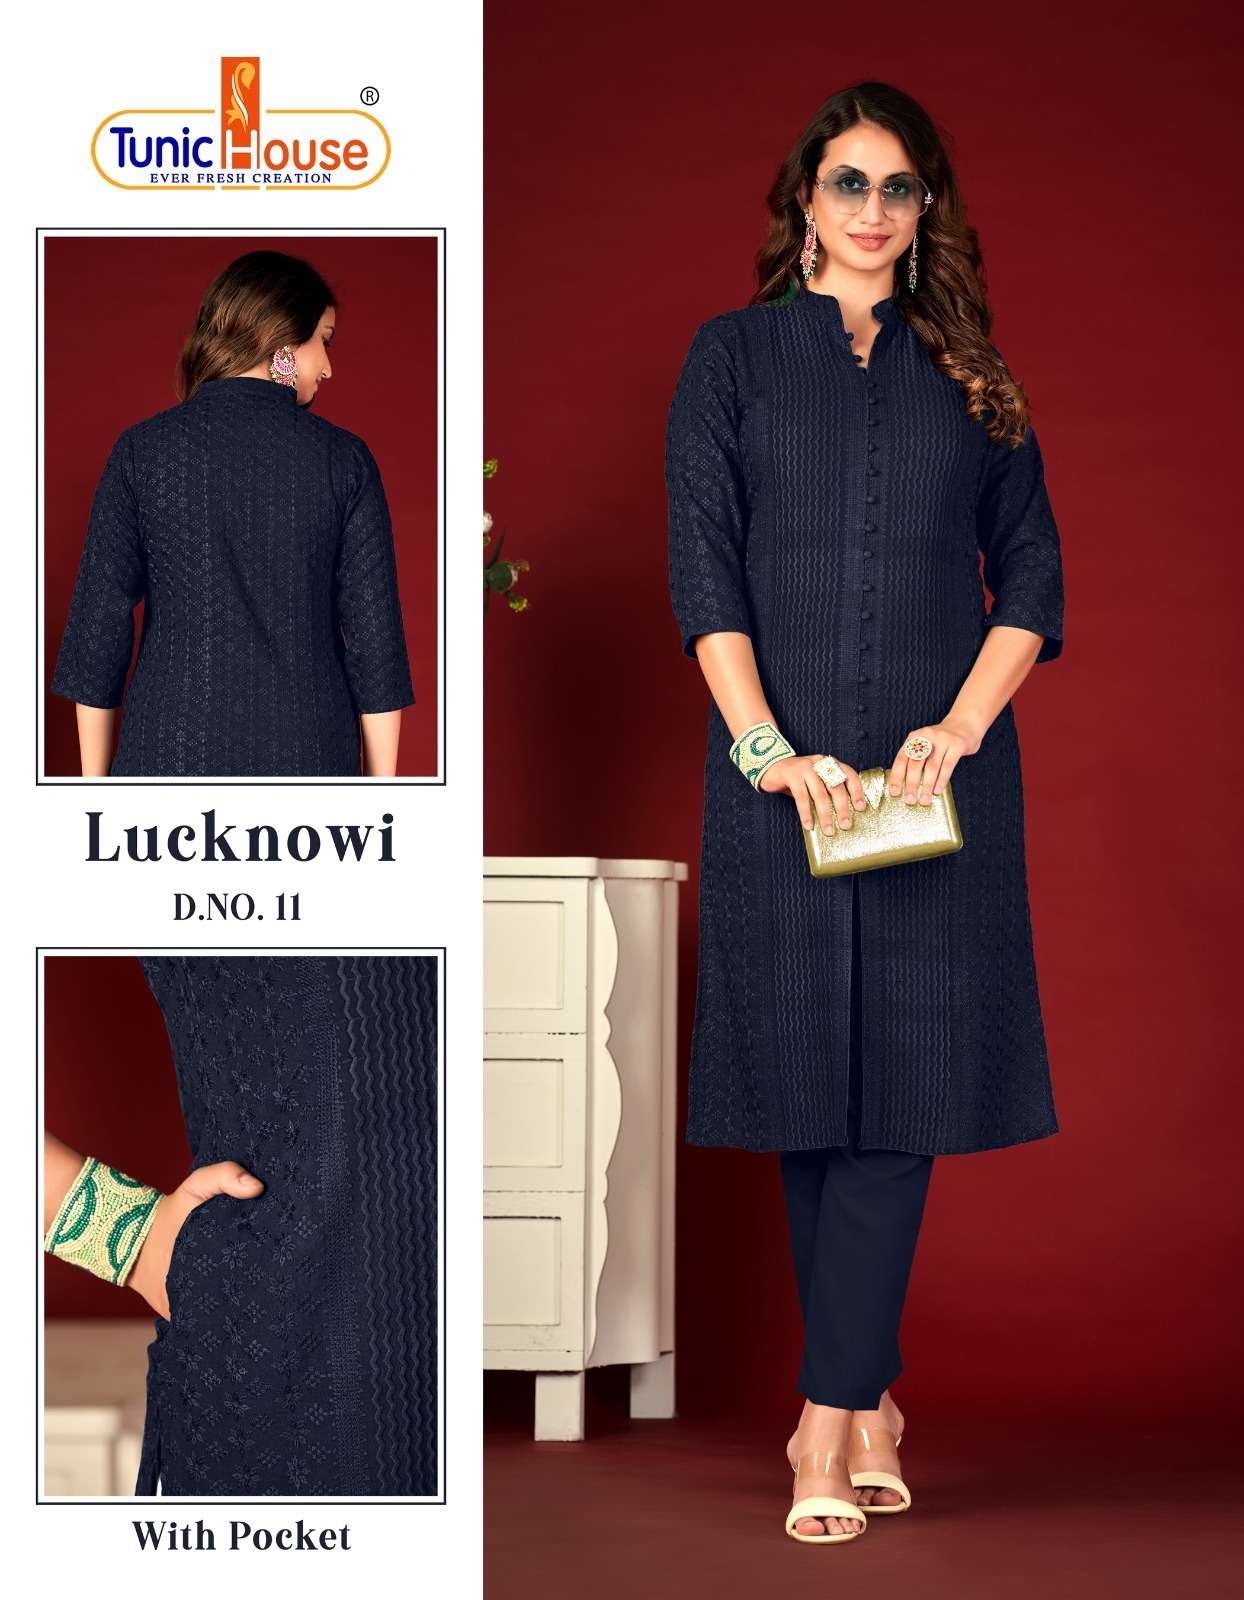 Tunic House Lucknowi Linning Viscose Rayon with fancy look  ...